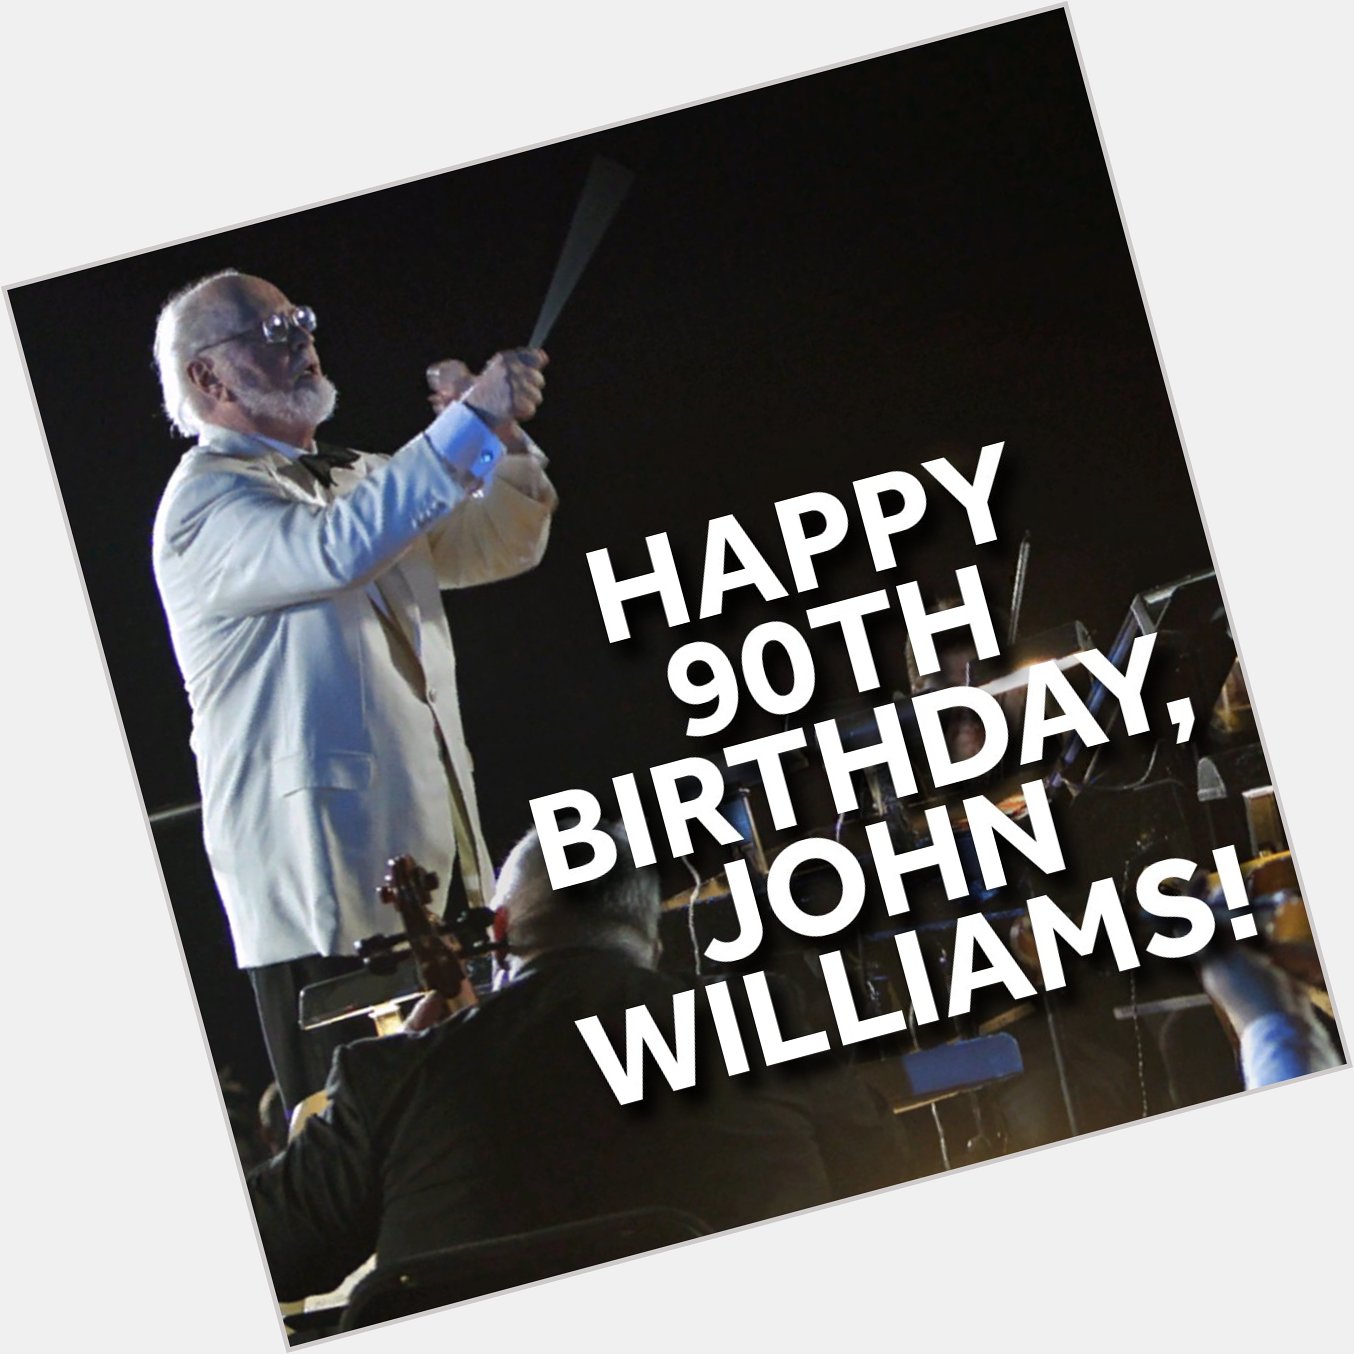 Happy 90th Birthday, John Williams!   What is your favorite film he scored the music for? 